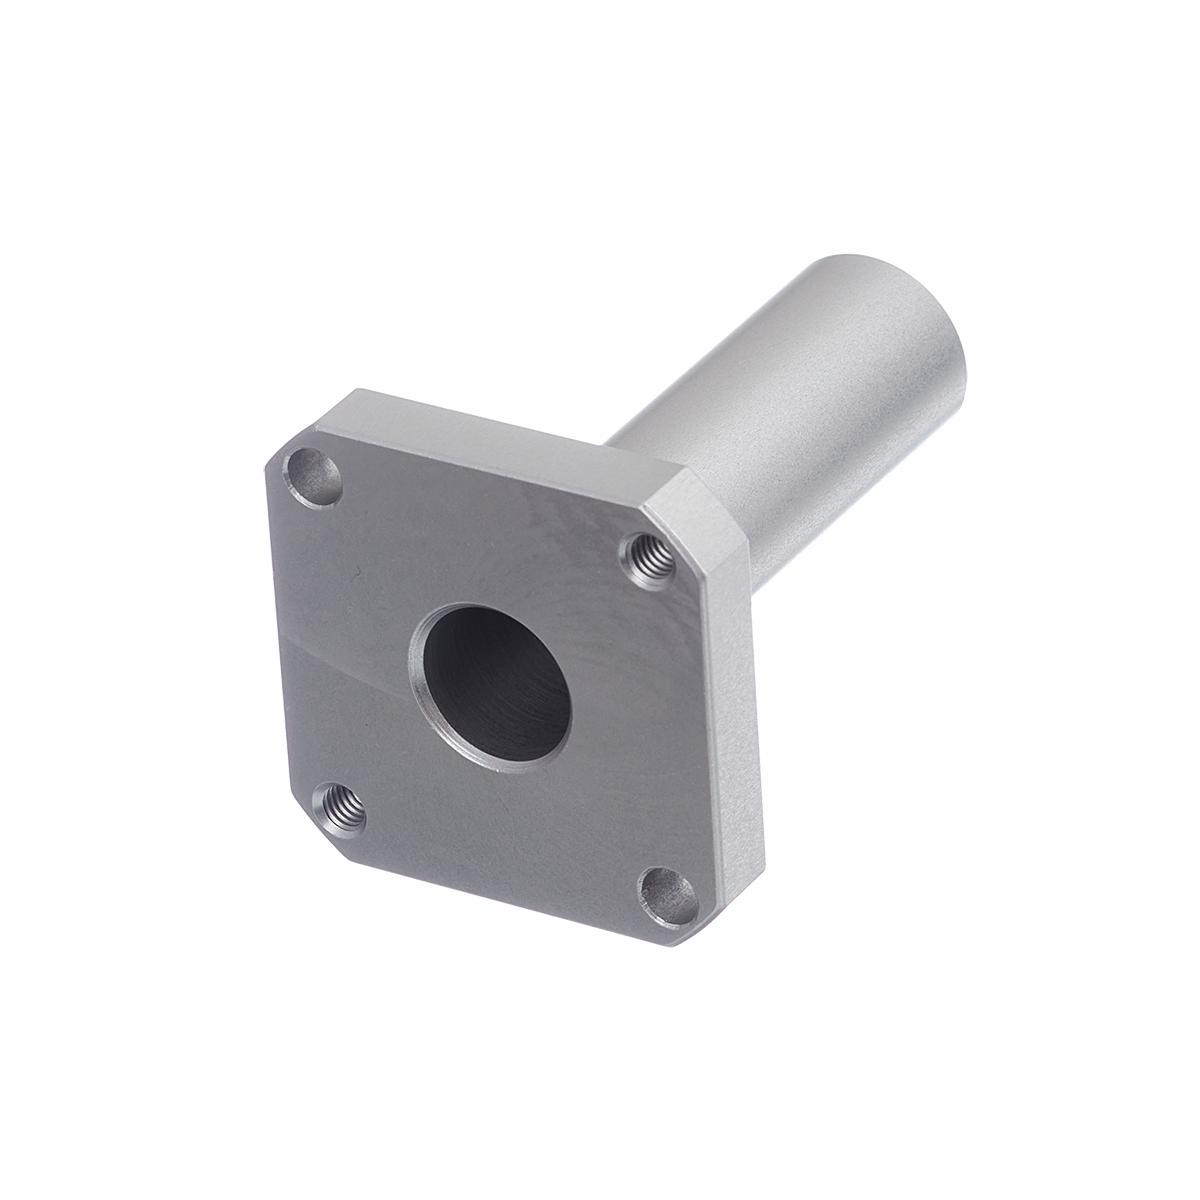 MB.CC. – Mounting Bracket for Compact Cylinder